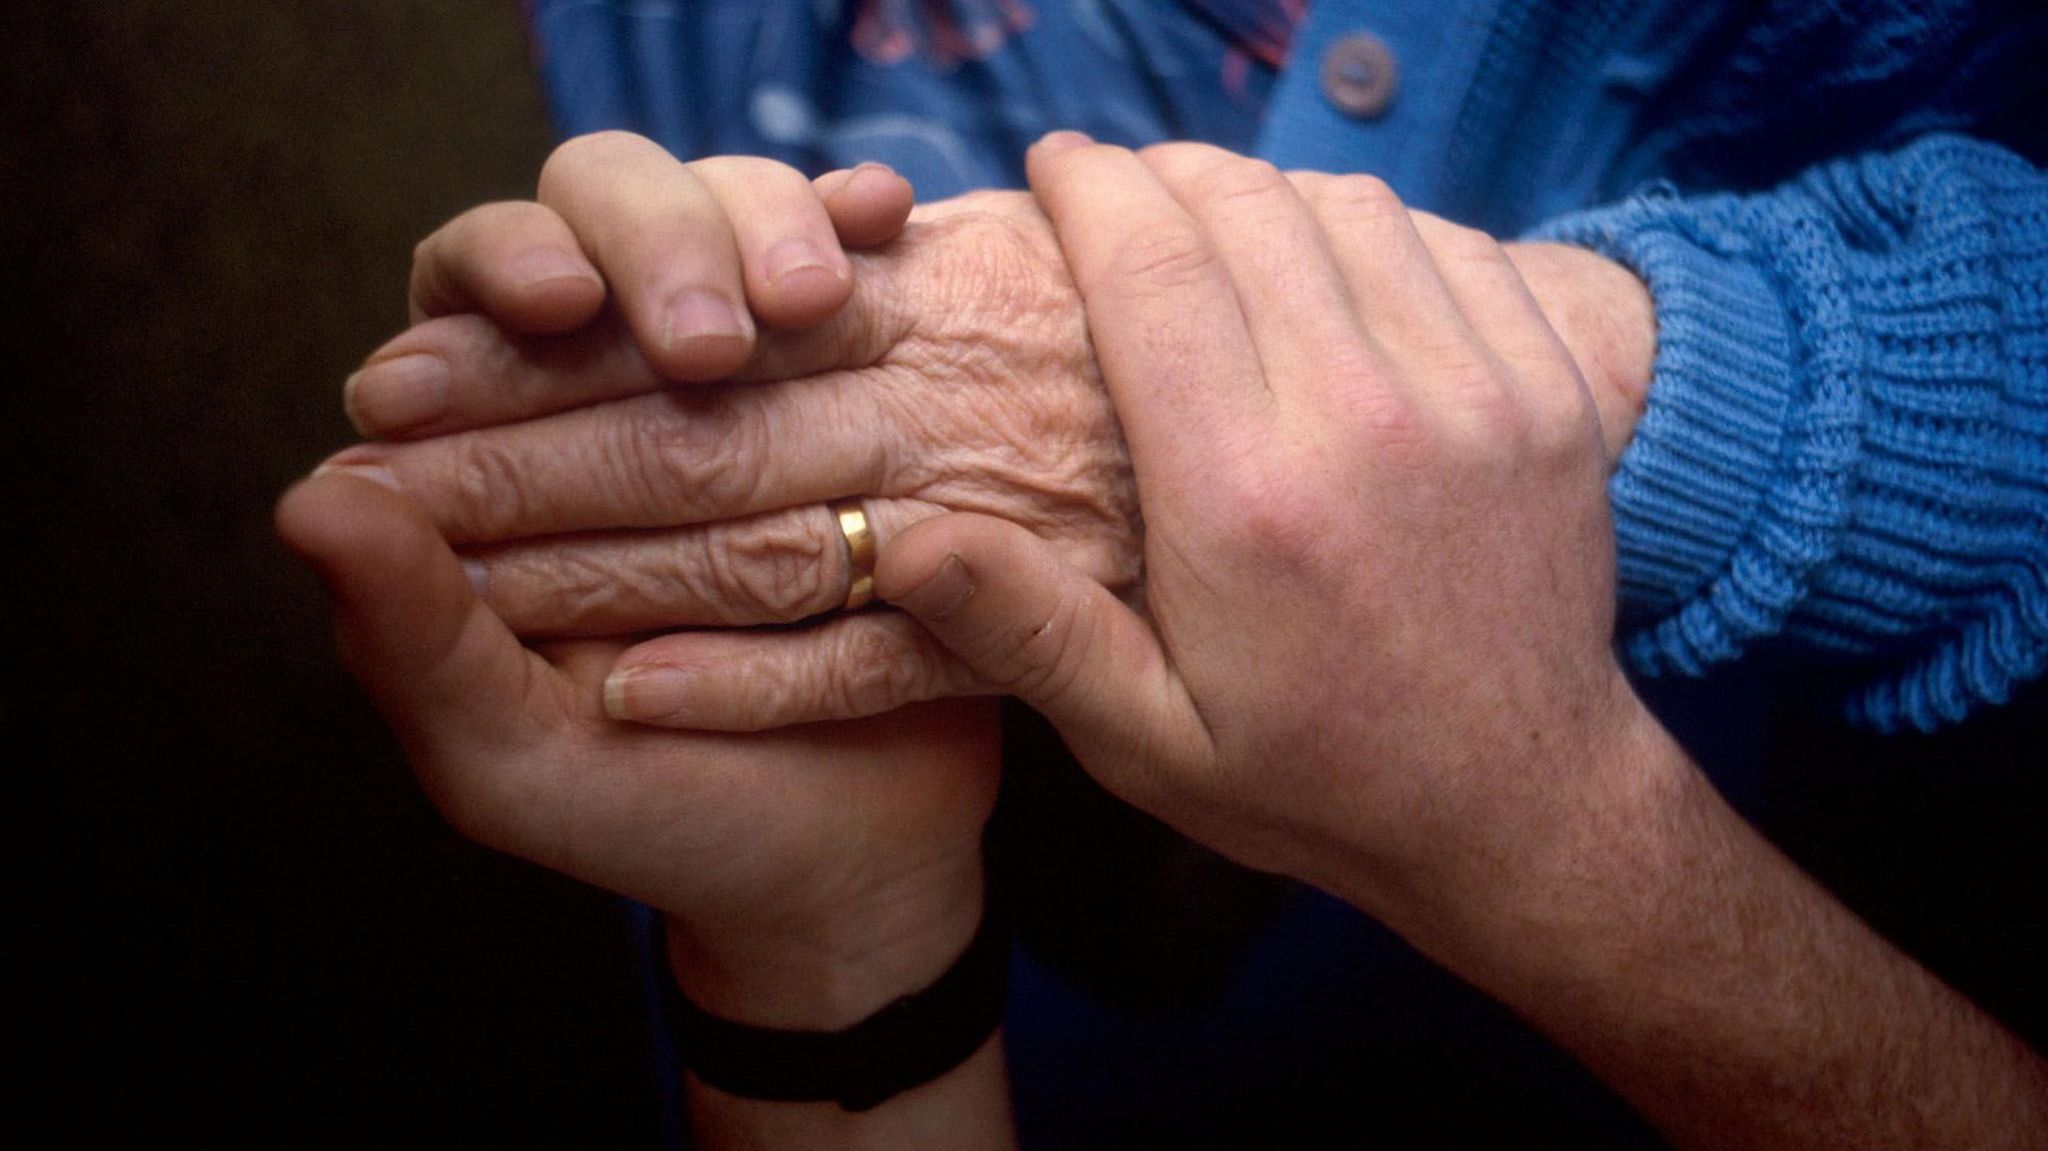 The hand of an elderly person being held by the hands of a younger person